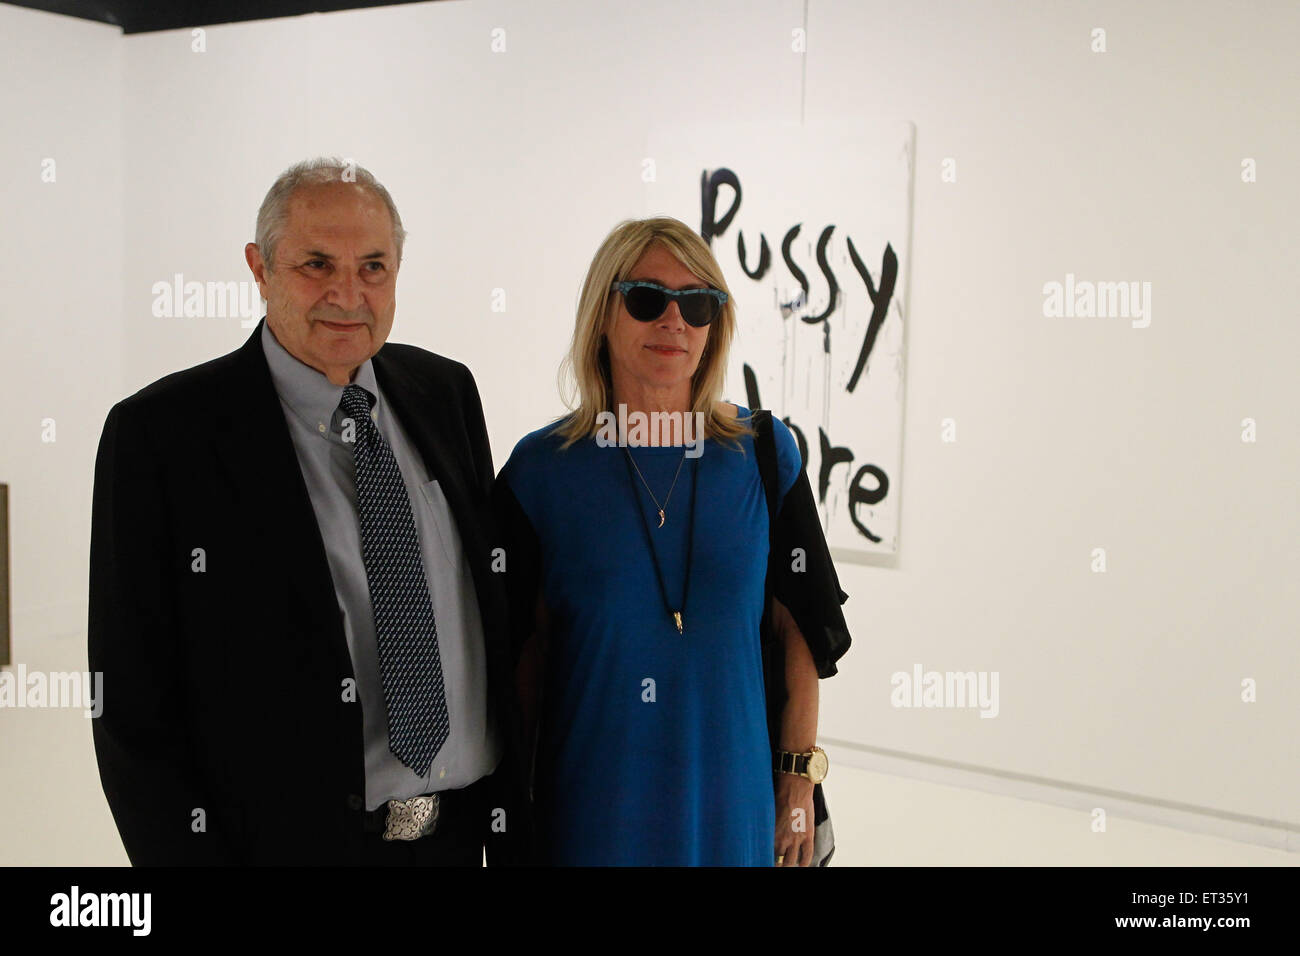 Athens, Greece. 11th June, 2015. Dakis Joannou with Kim Gordon at the Benaki museum. Benaki Museum presents the exhibition ''Kim Gordon - Design Office: Noise Name Paintings and Sculptures of Rock Bands that are broken up''. At her exhibition at the Benaki Museum, Kim Gordon presents a selection of the ''Noise Paintings'' along with a new body of work. The long, hall-like room at the Benaki Museum, Main Building is a memorial to bands that worked with dissonance and aspects of what is now called noise music. Credit:  ZUMA Press, Inc./Alamy Live News Stock Photo